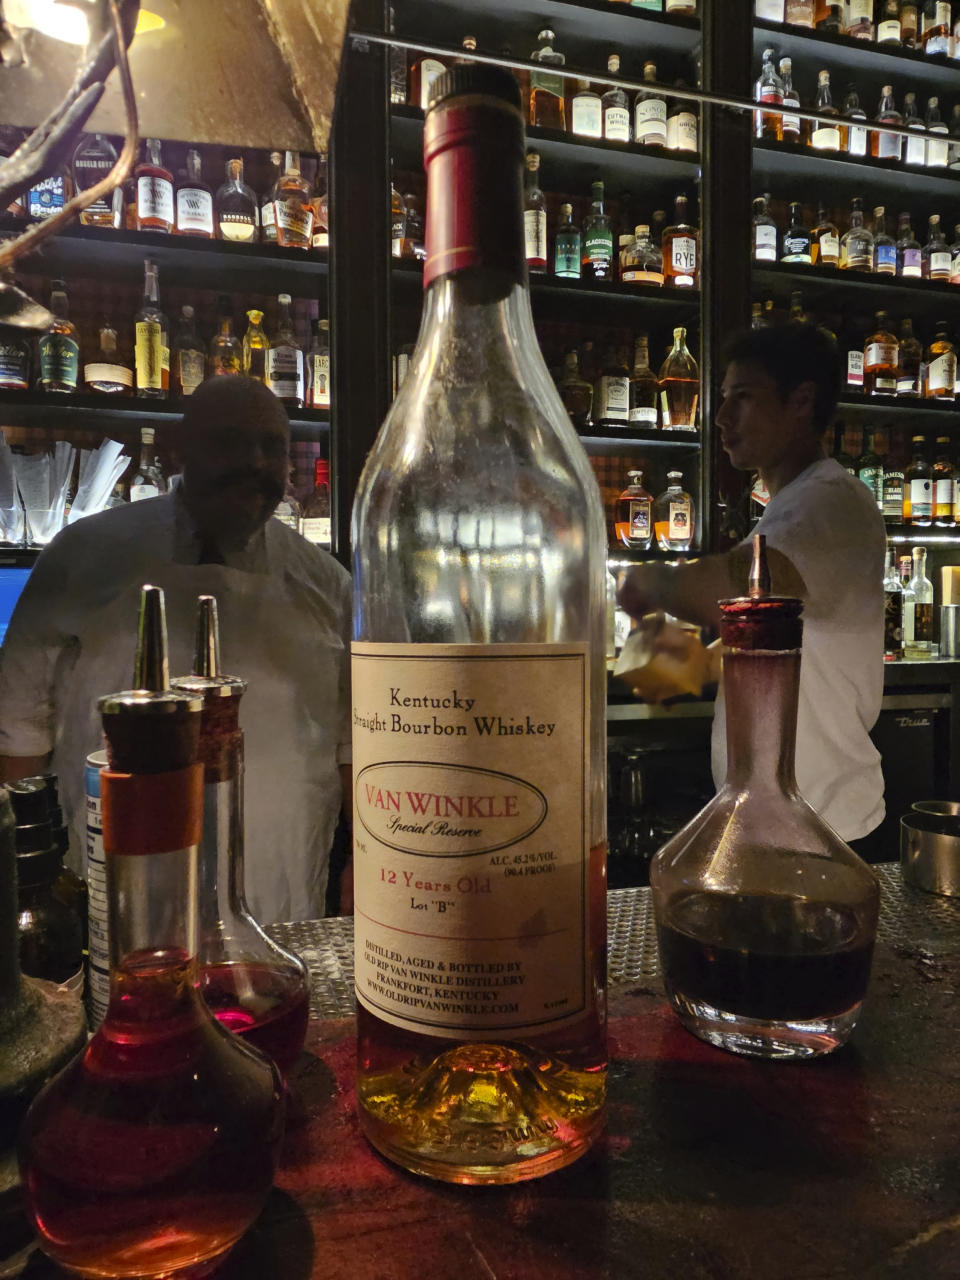 A bottle of Pappy Van Winkle,12-year-old aged bourbon is shown at Seven Grand, a whiskey bar downtown Los Angeles Saturday, March 4, 2023. Seven Grand offers an extensive selection of over 700 different whiskies from around the world, including rare and hard-to-find bottles. (AP Photo/Damian Dovarganes)